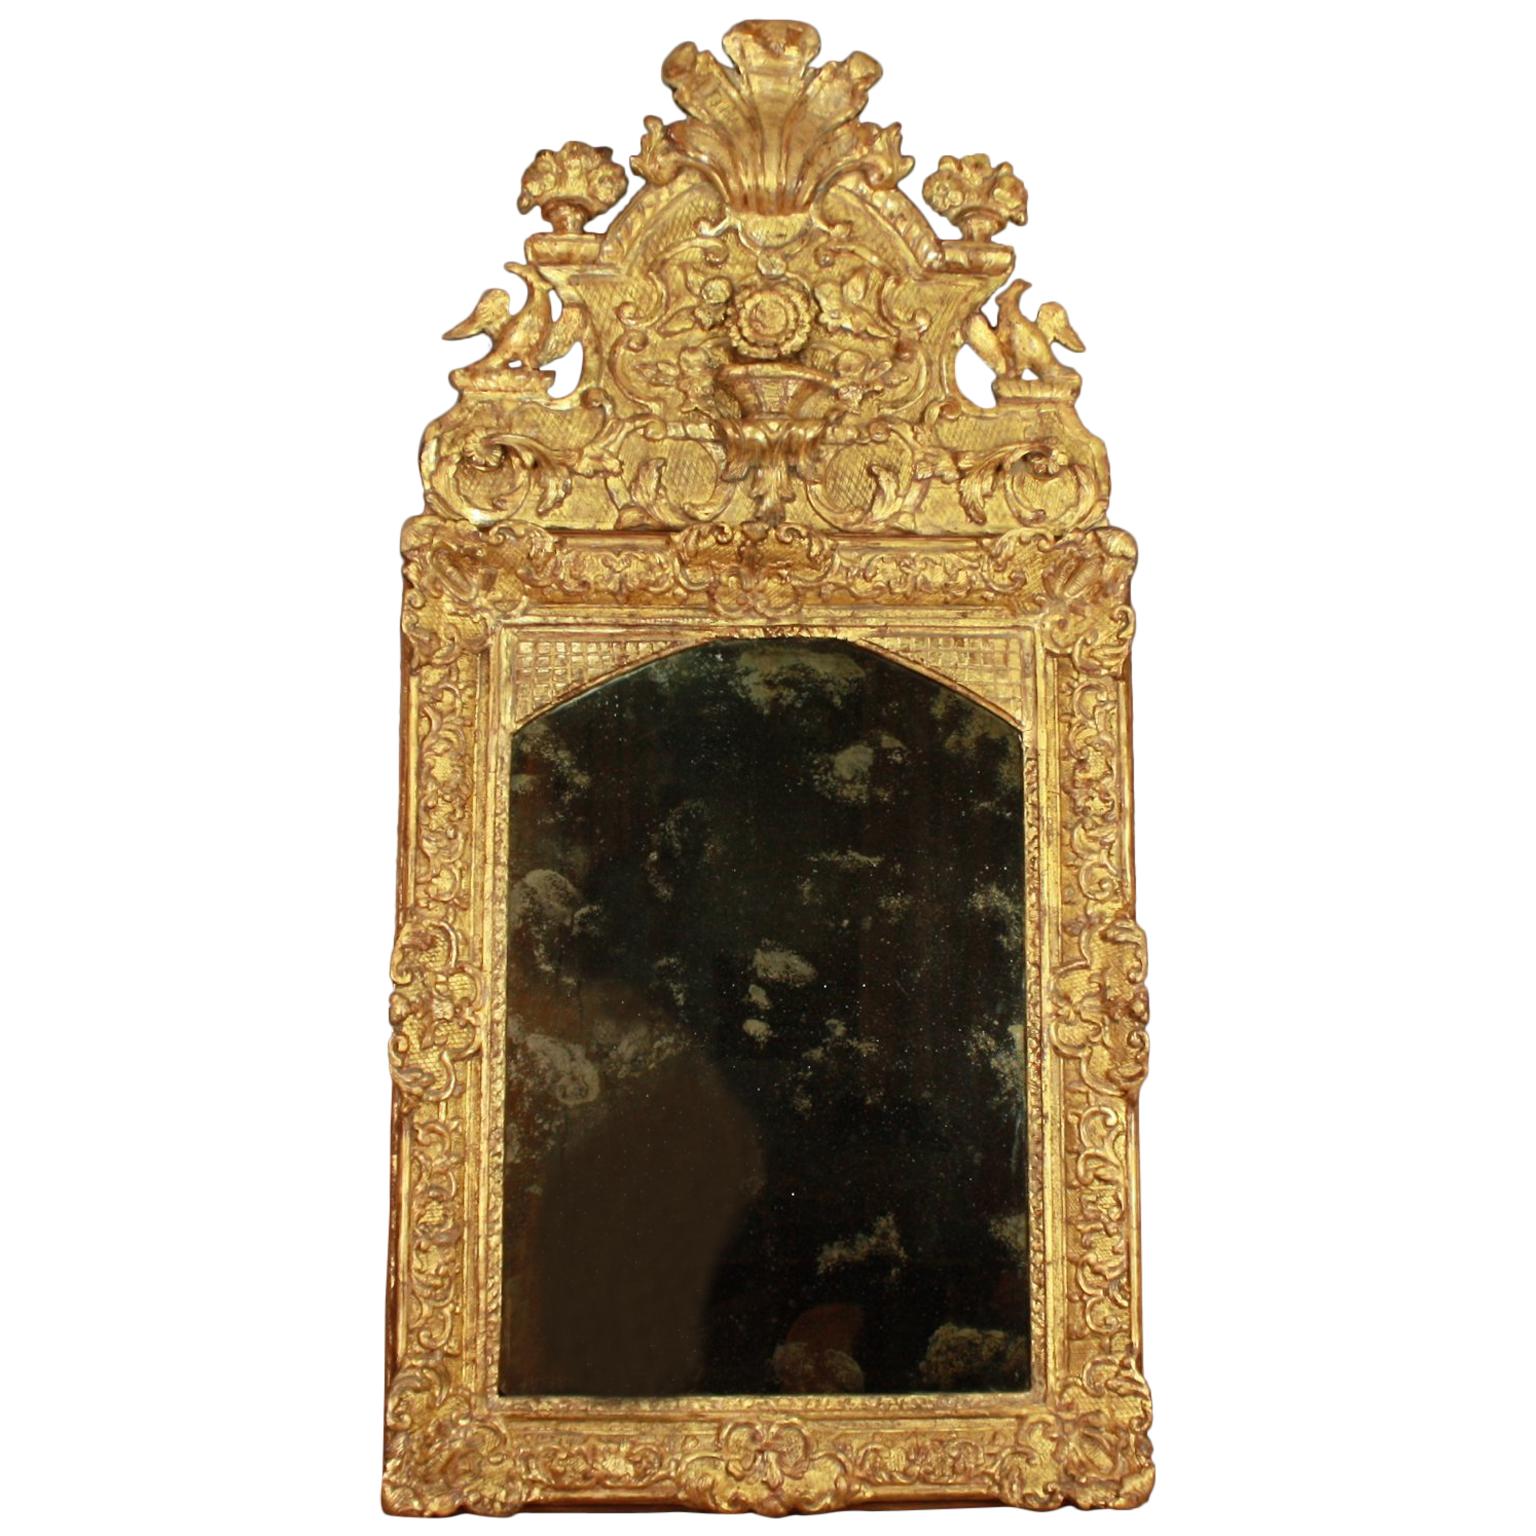 French Early 18th Century Régence Vase and Birds Cresting Giltwood Mirror